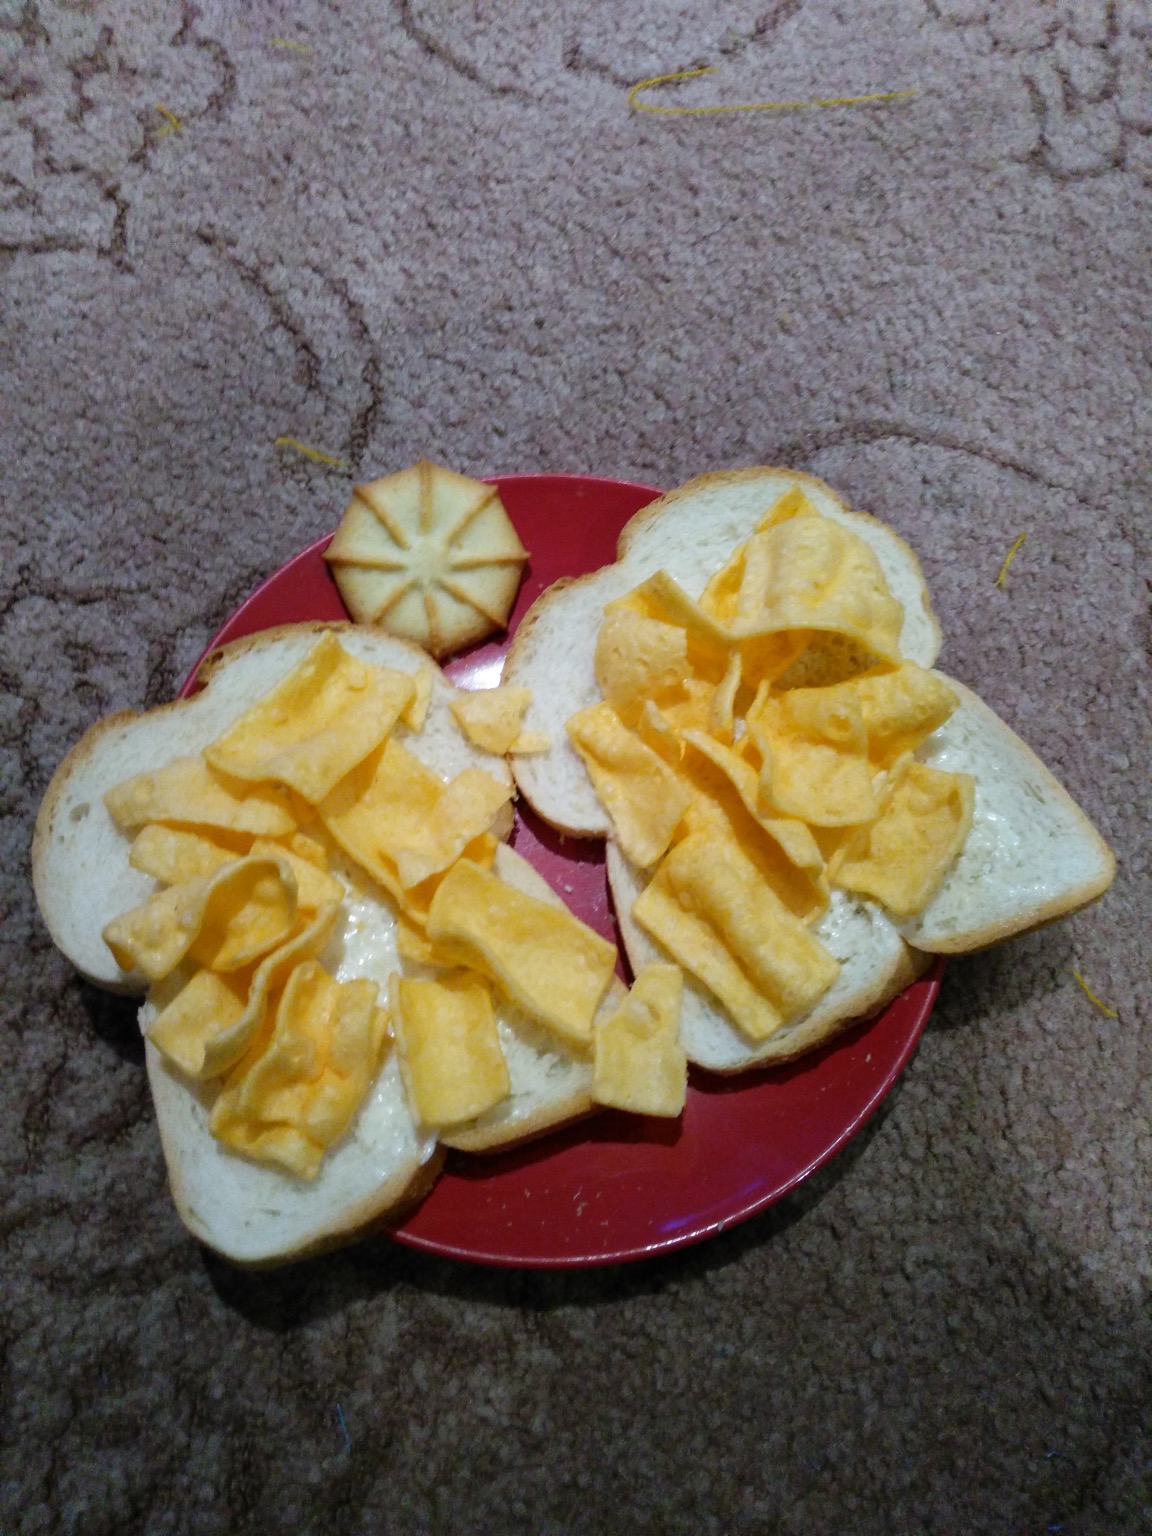 Corn snacks on buttered white bread with biscuit